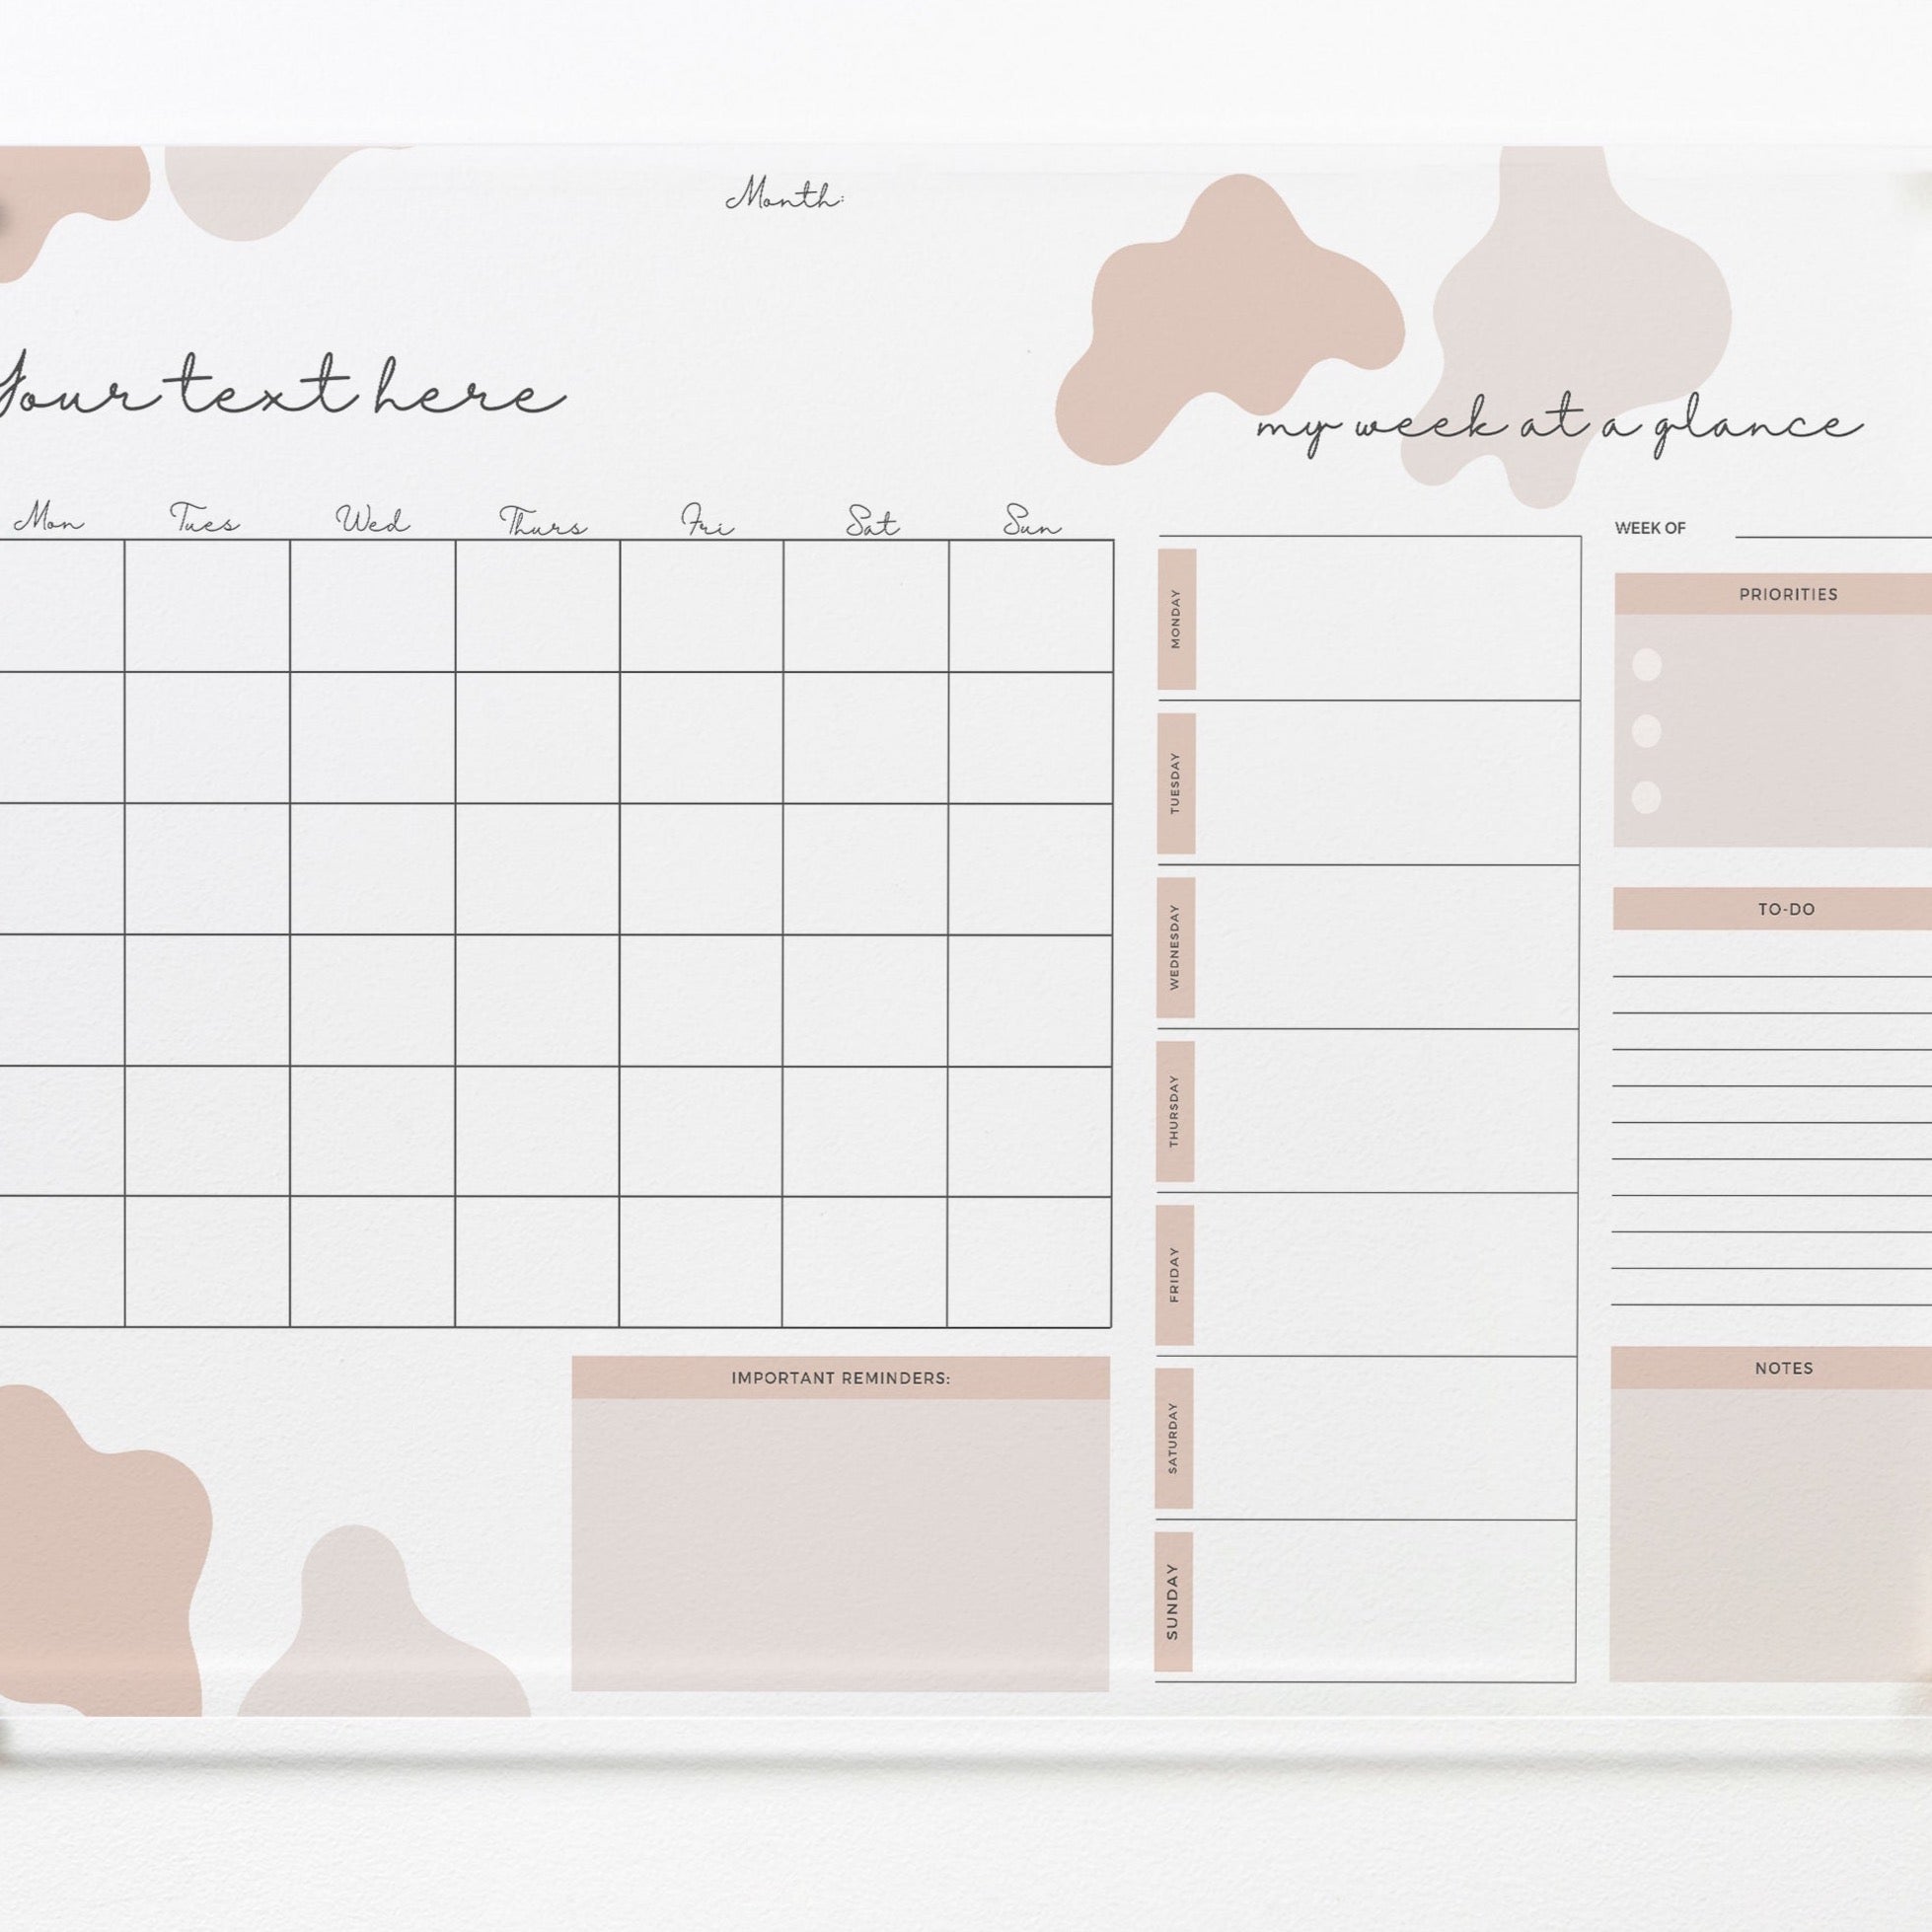 The "Custom Weekly Monthly Planner - Cute in Pink" dry erase acrylic board mounted on a wall with gold pins. It features a monthly calendar grid, sections for weekly planning, priorities, to-dos, notes, and important reminders. The board is decorated with whimsical pink and beige shapes, providing a cute and functional planning tool.